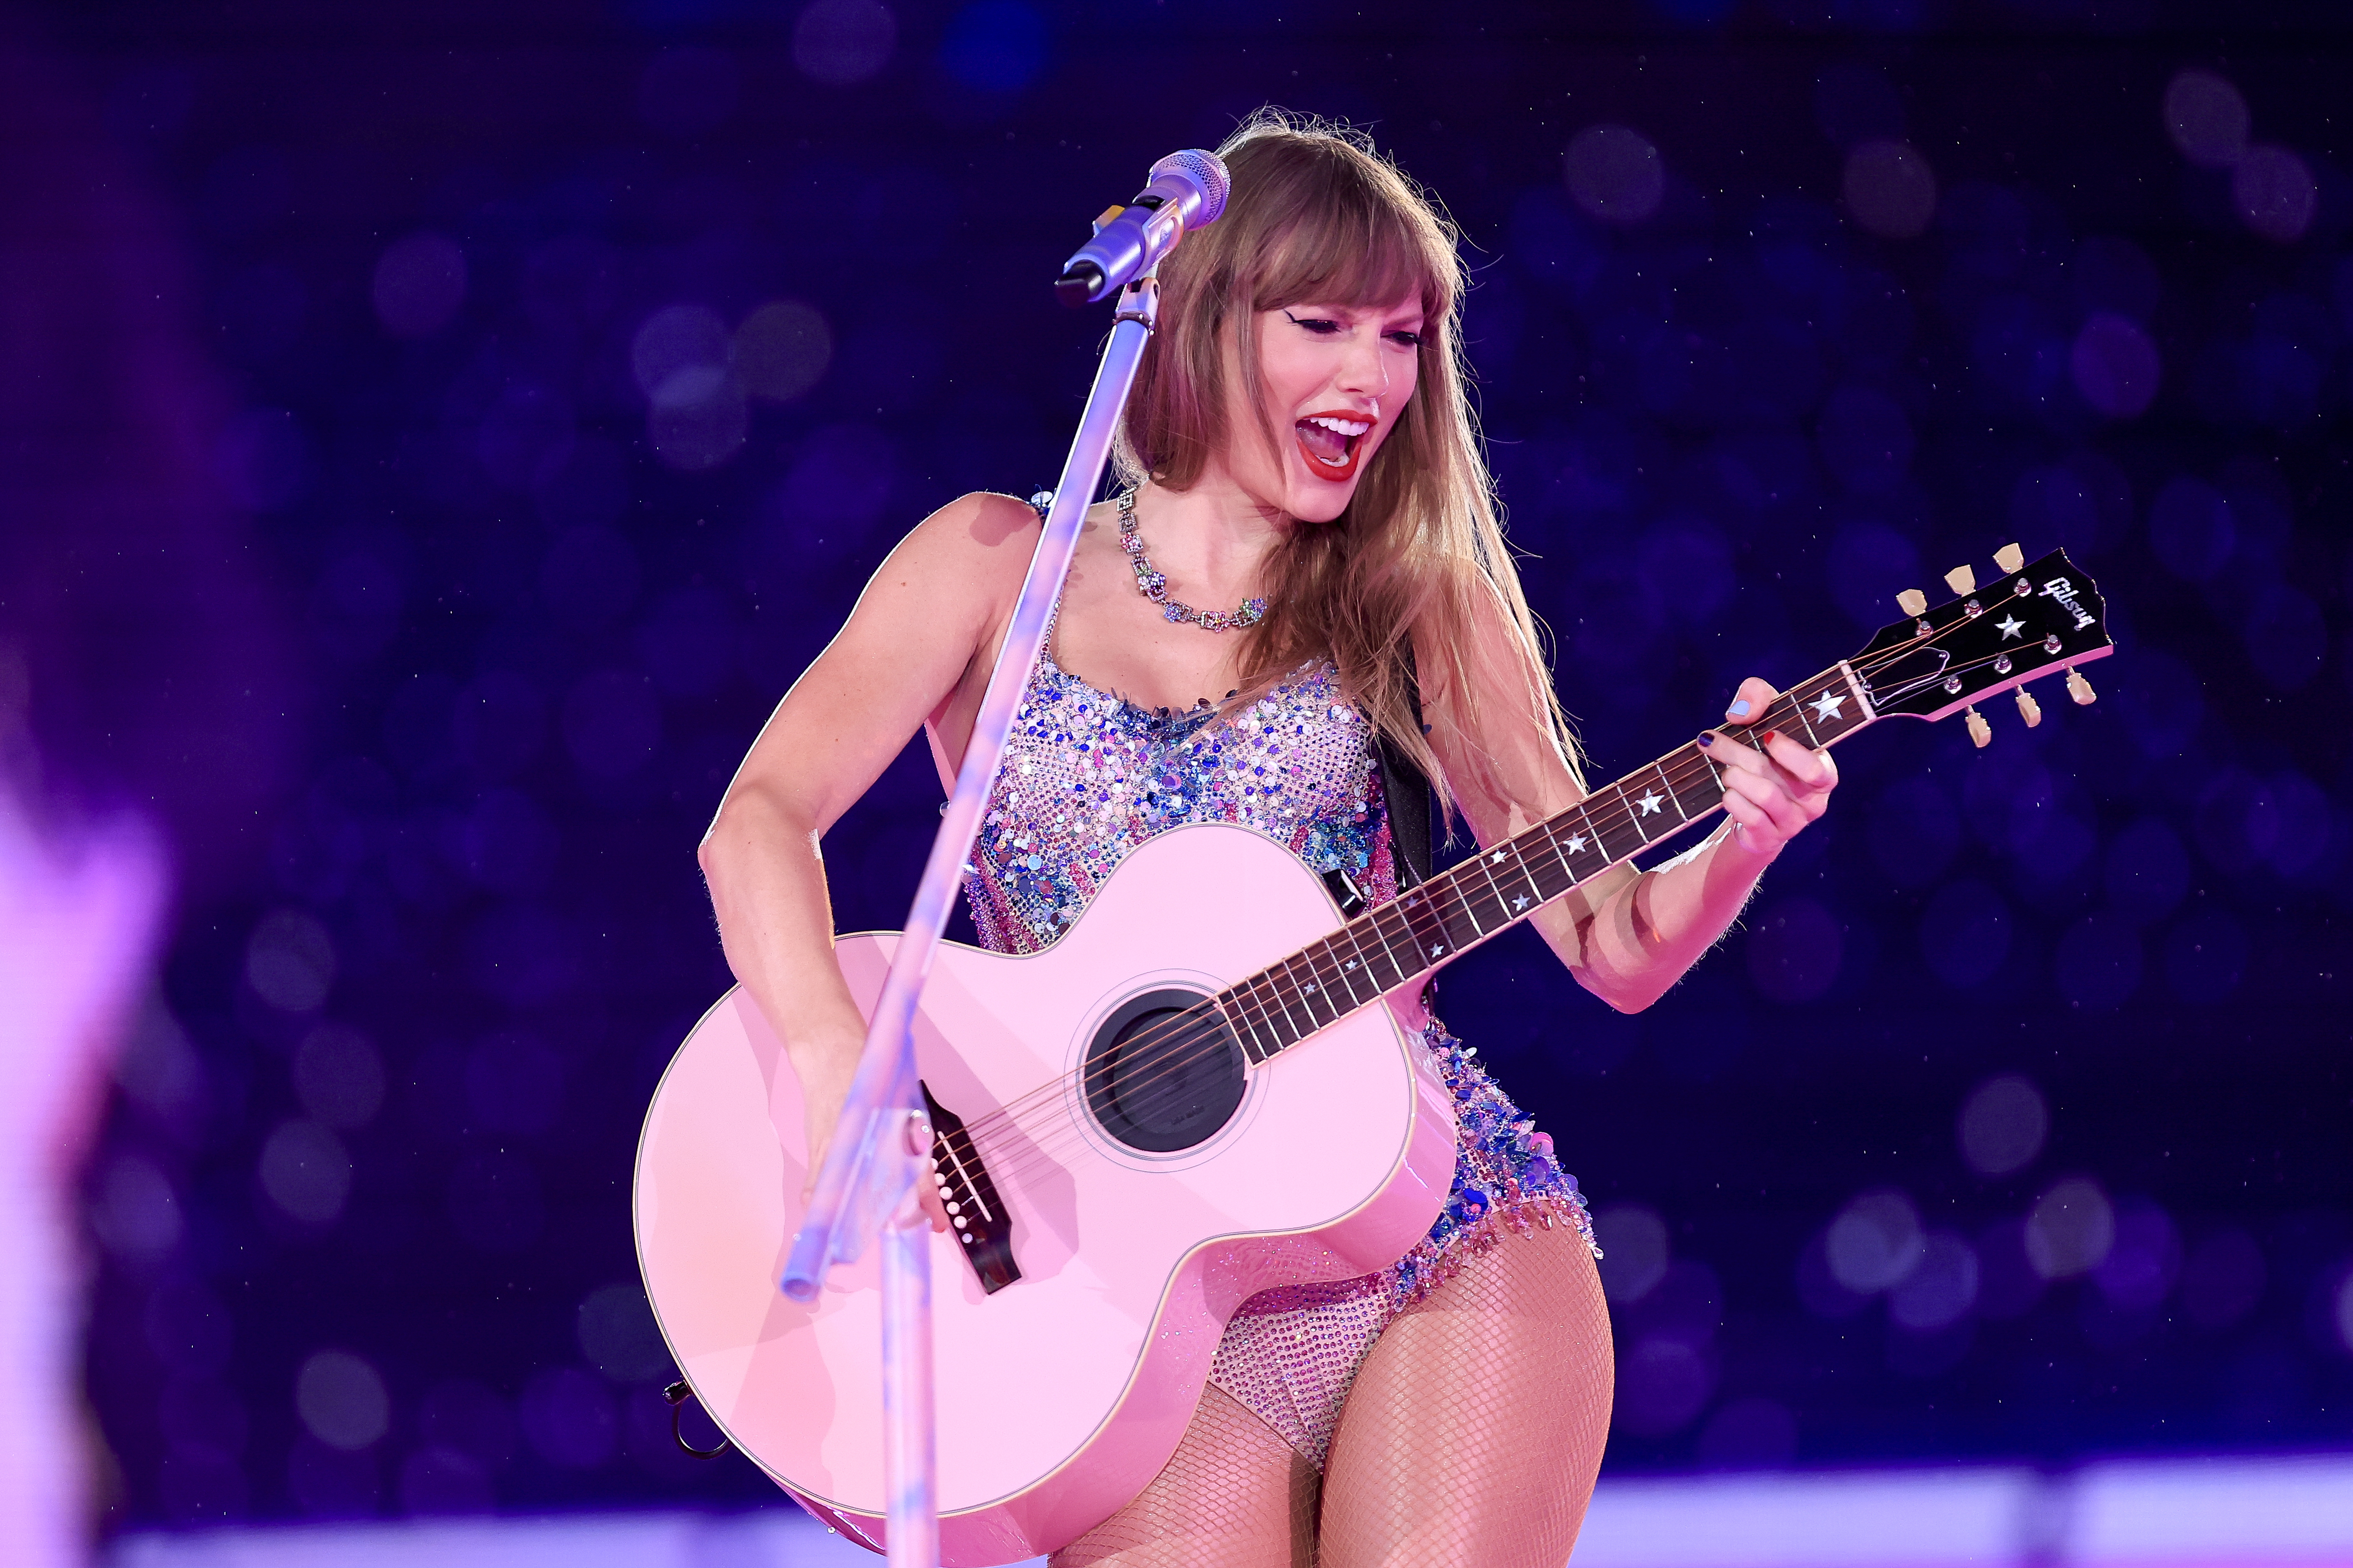 Taylor Swift onstage smiling and playing the guitar